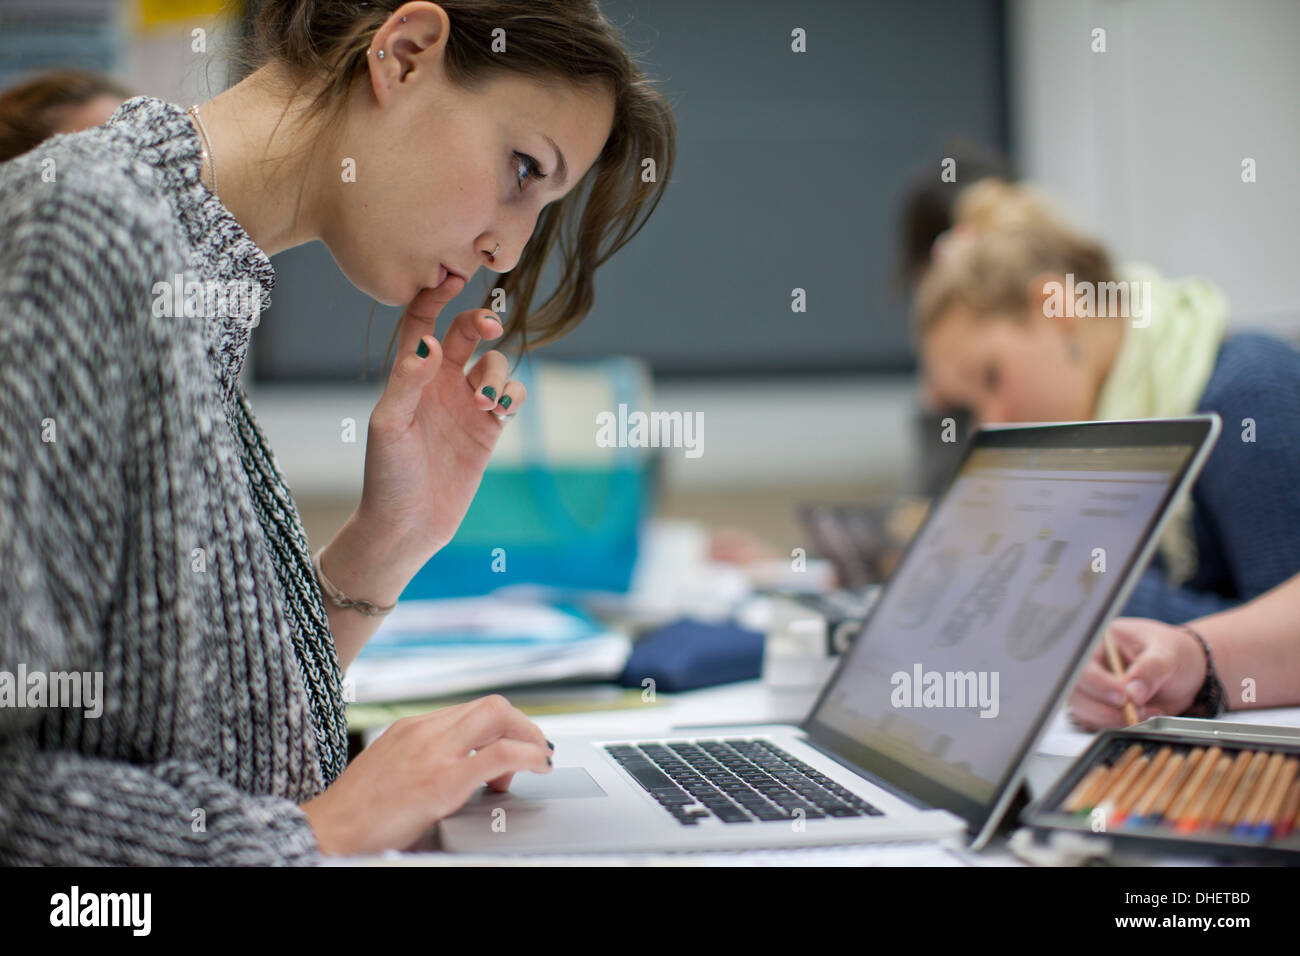 Woman using laptop in art class Banque D'Images